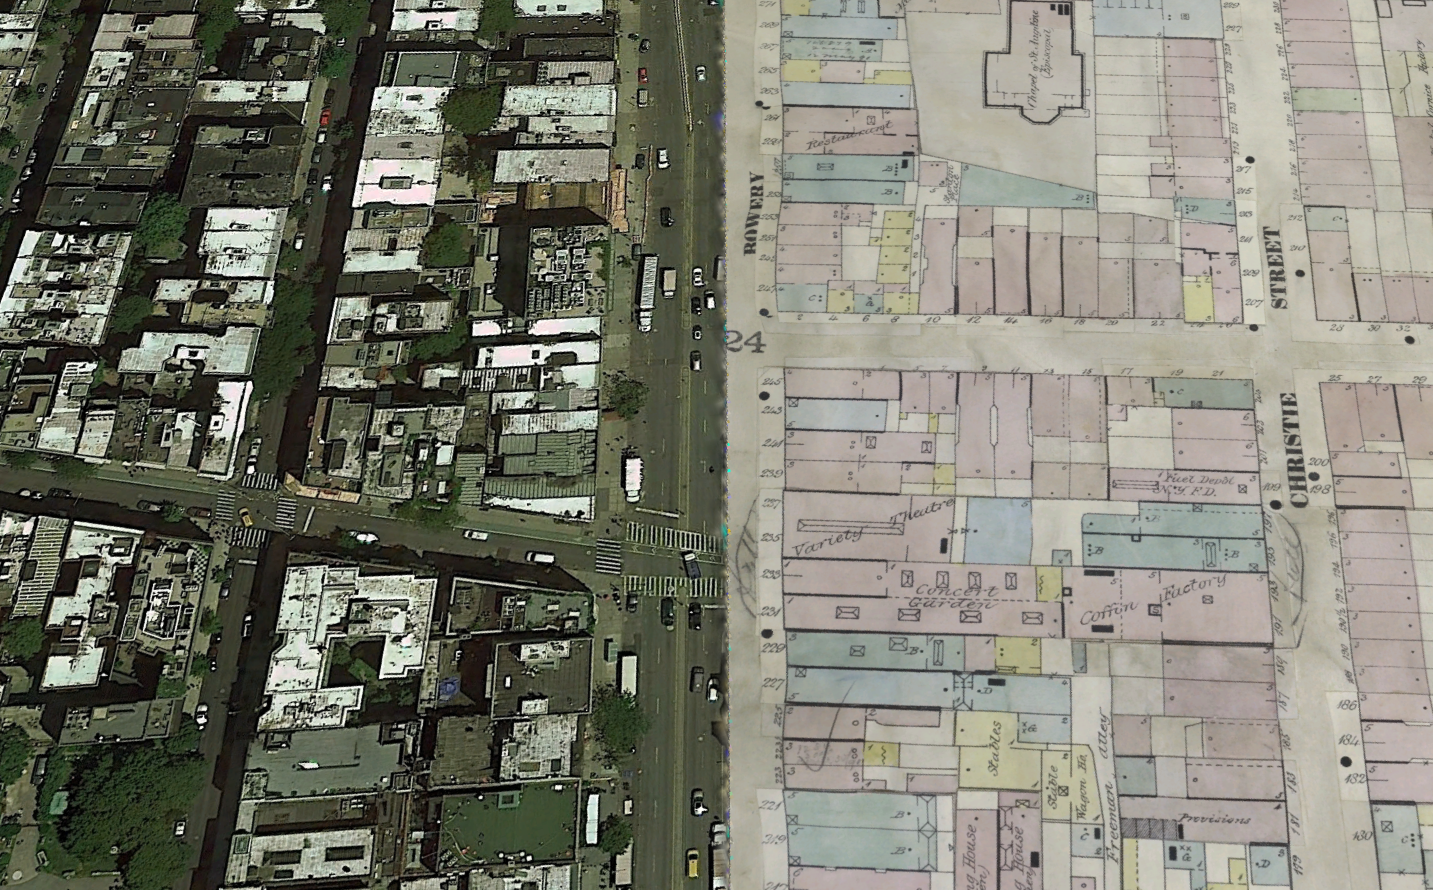 Google Earth Pro showing half contemporary satellite image and half historical map